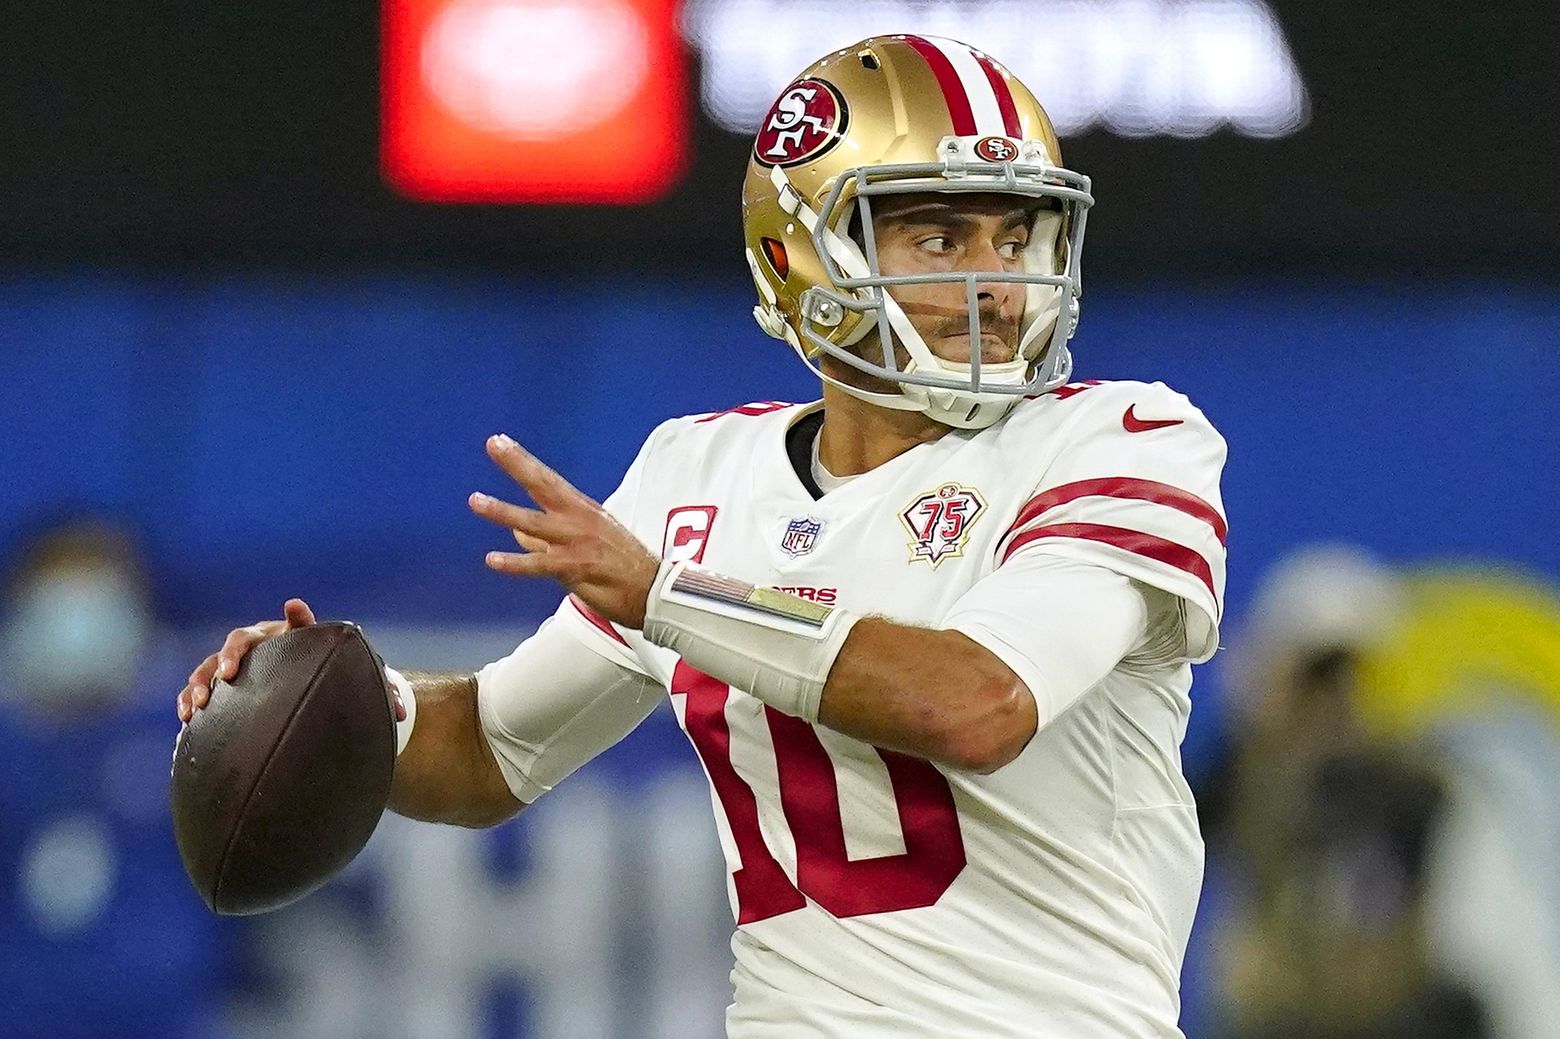 Forget the haters. 49ers' Jimmy Garoppolo keeps winning